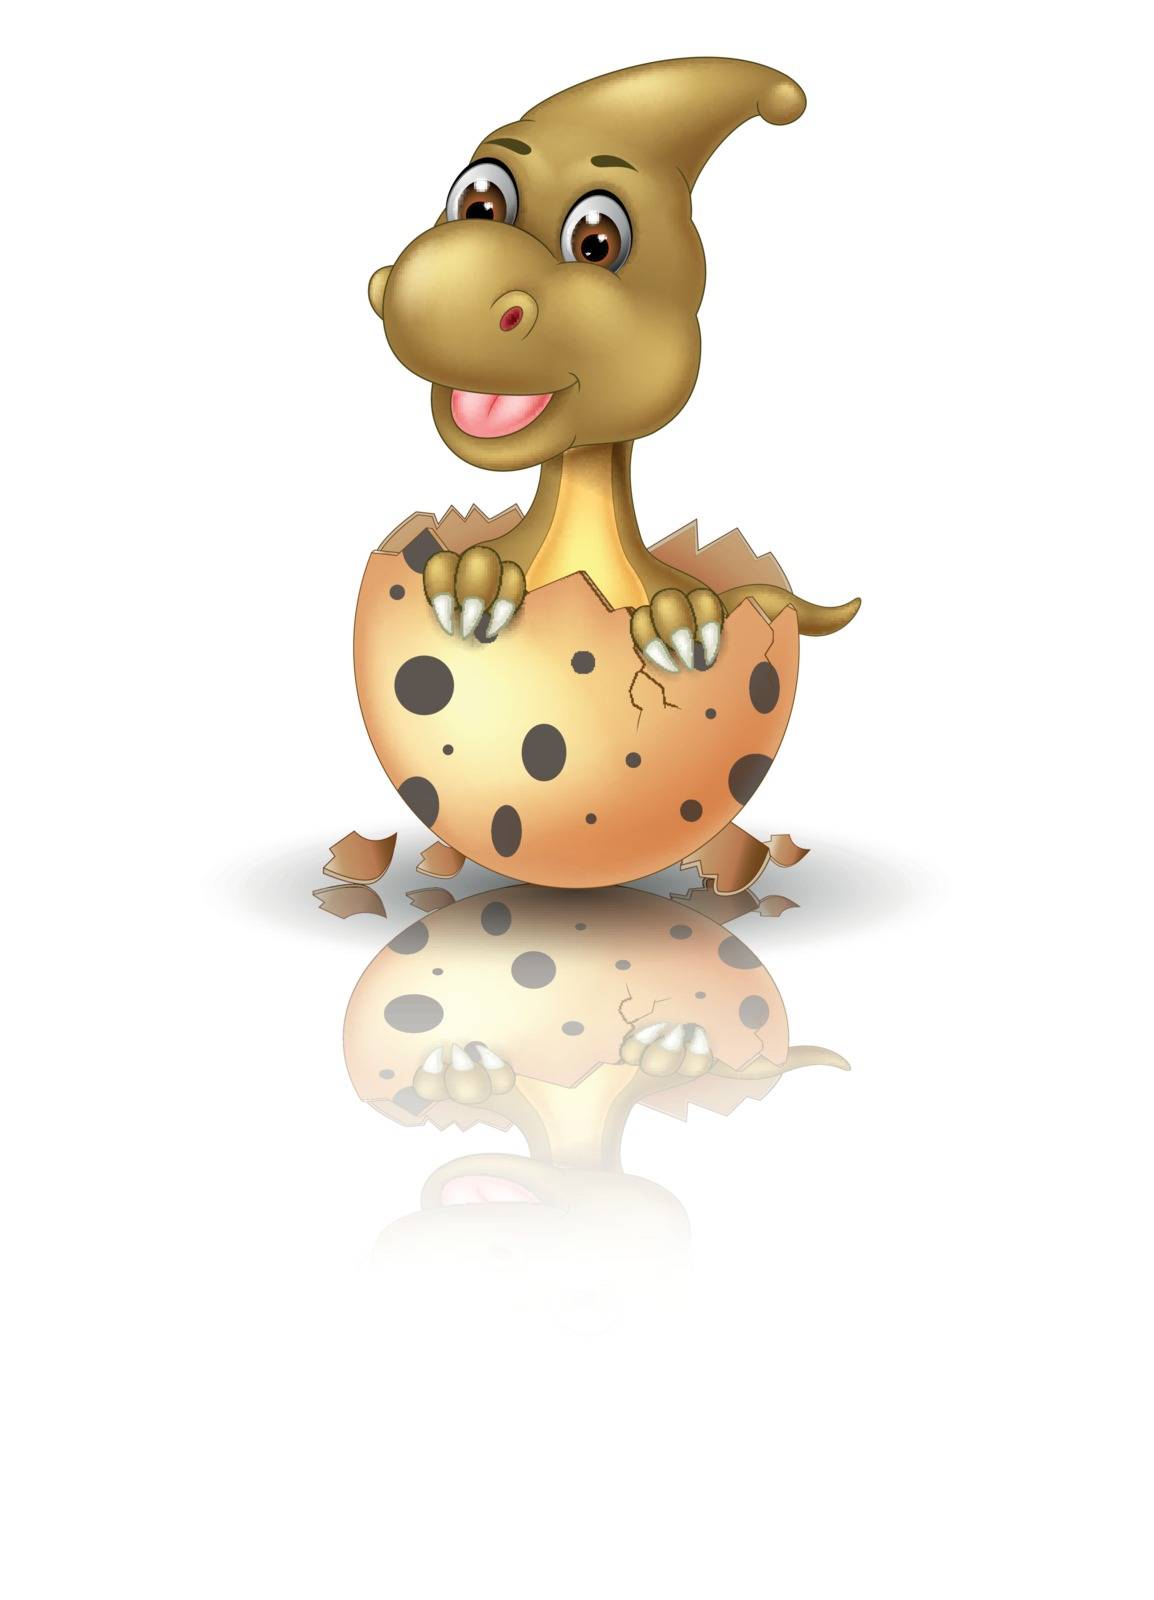 Little Brown Dhinosaur In Brown Cracked Egg Cartoon for your design